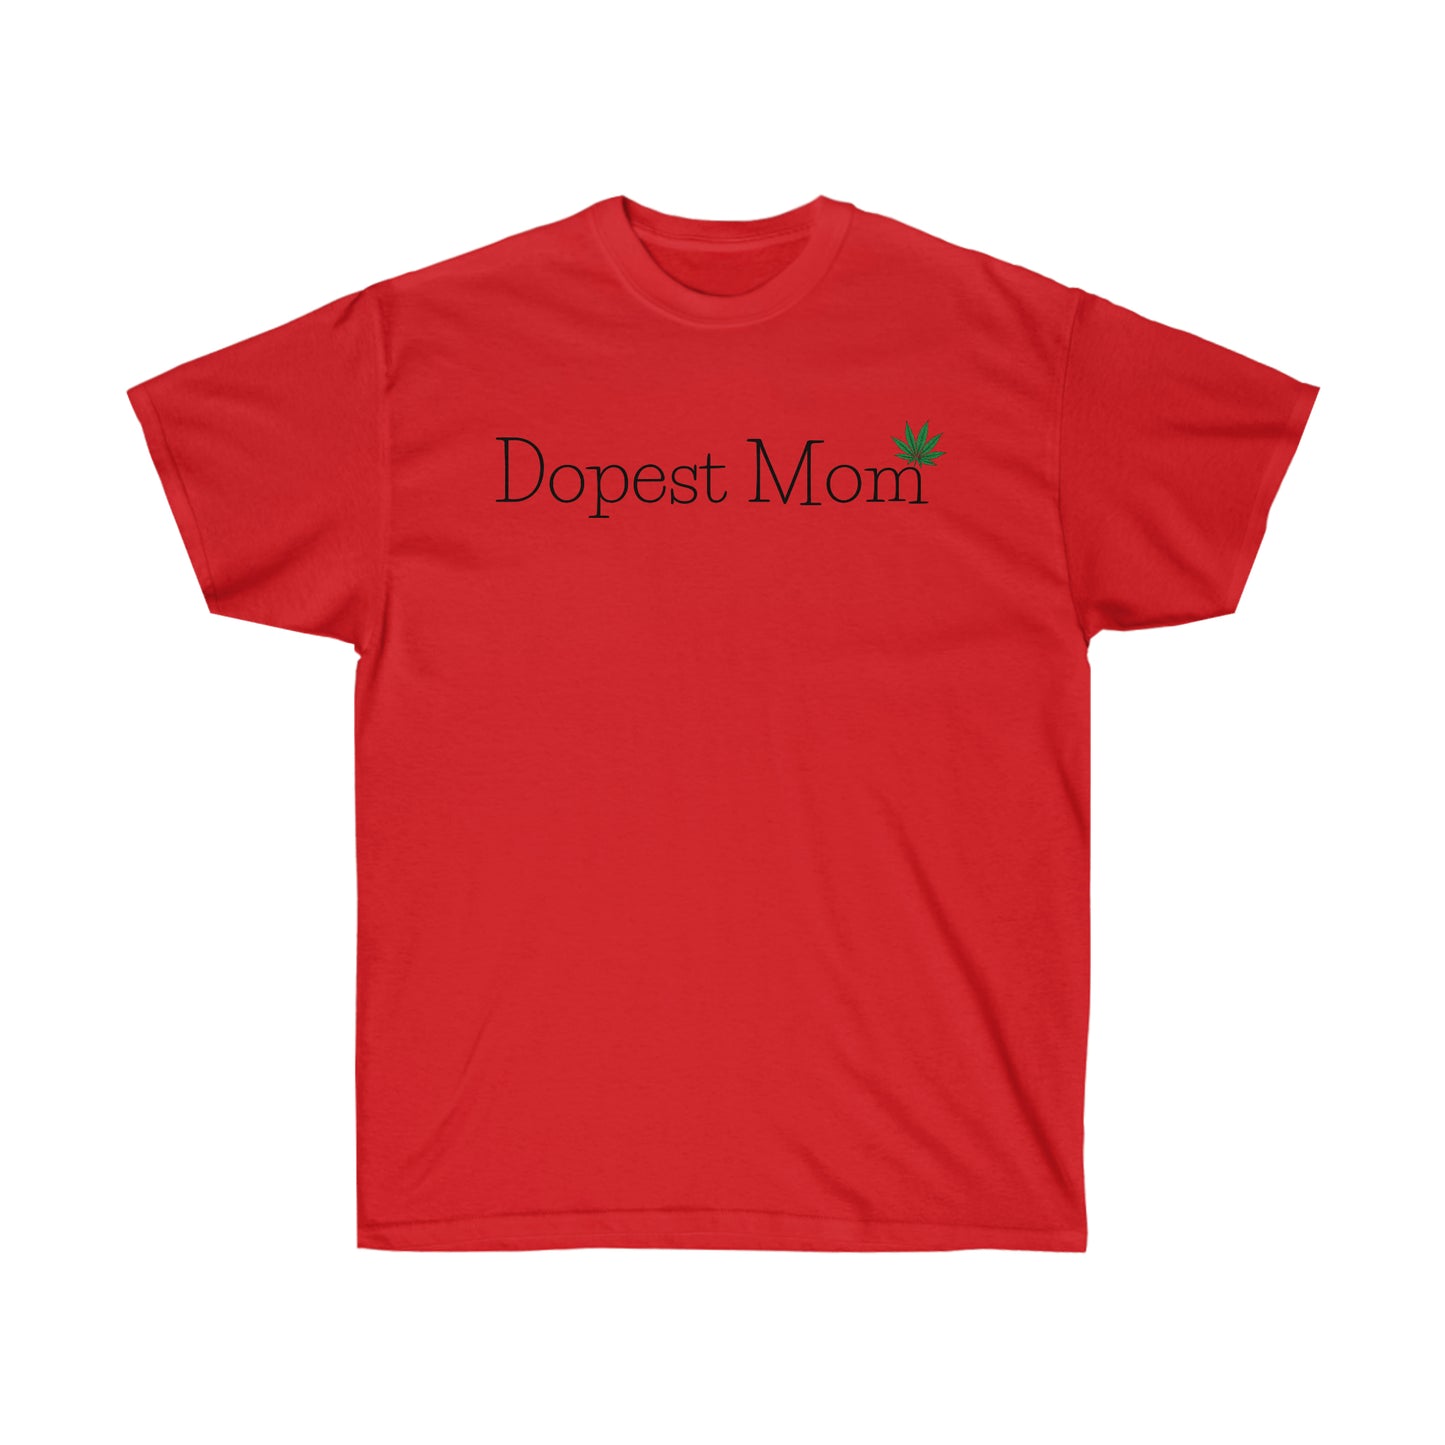 A red Dopest Mom Weed T-Shirt with the word 'deposit mom' on it.